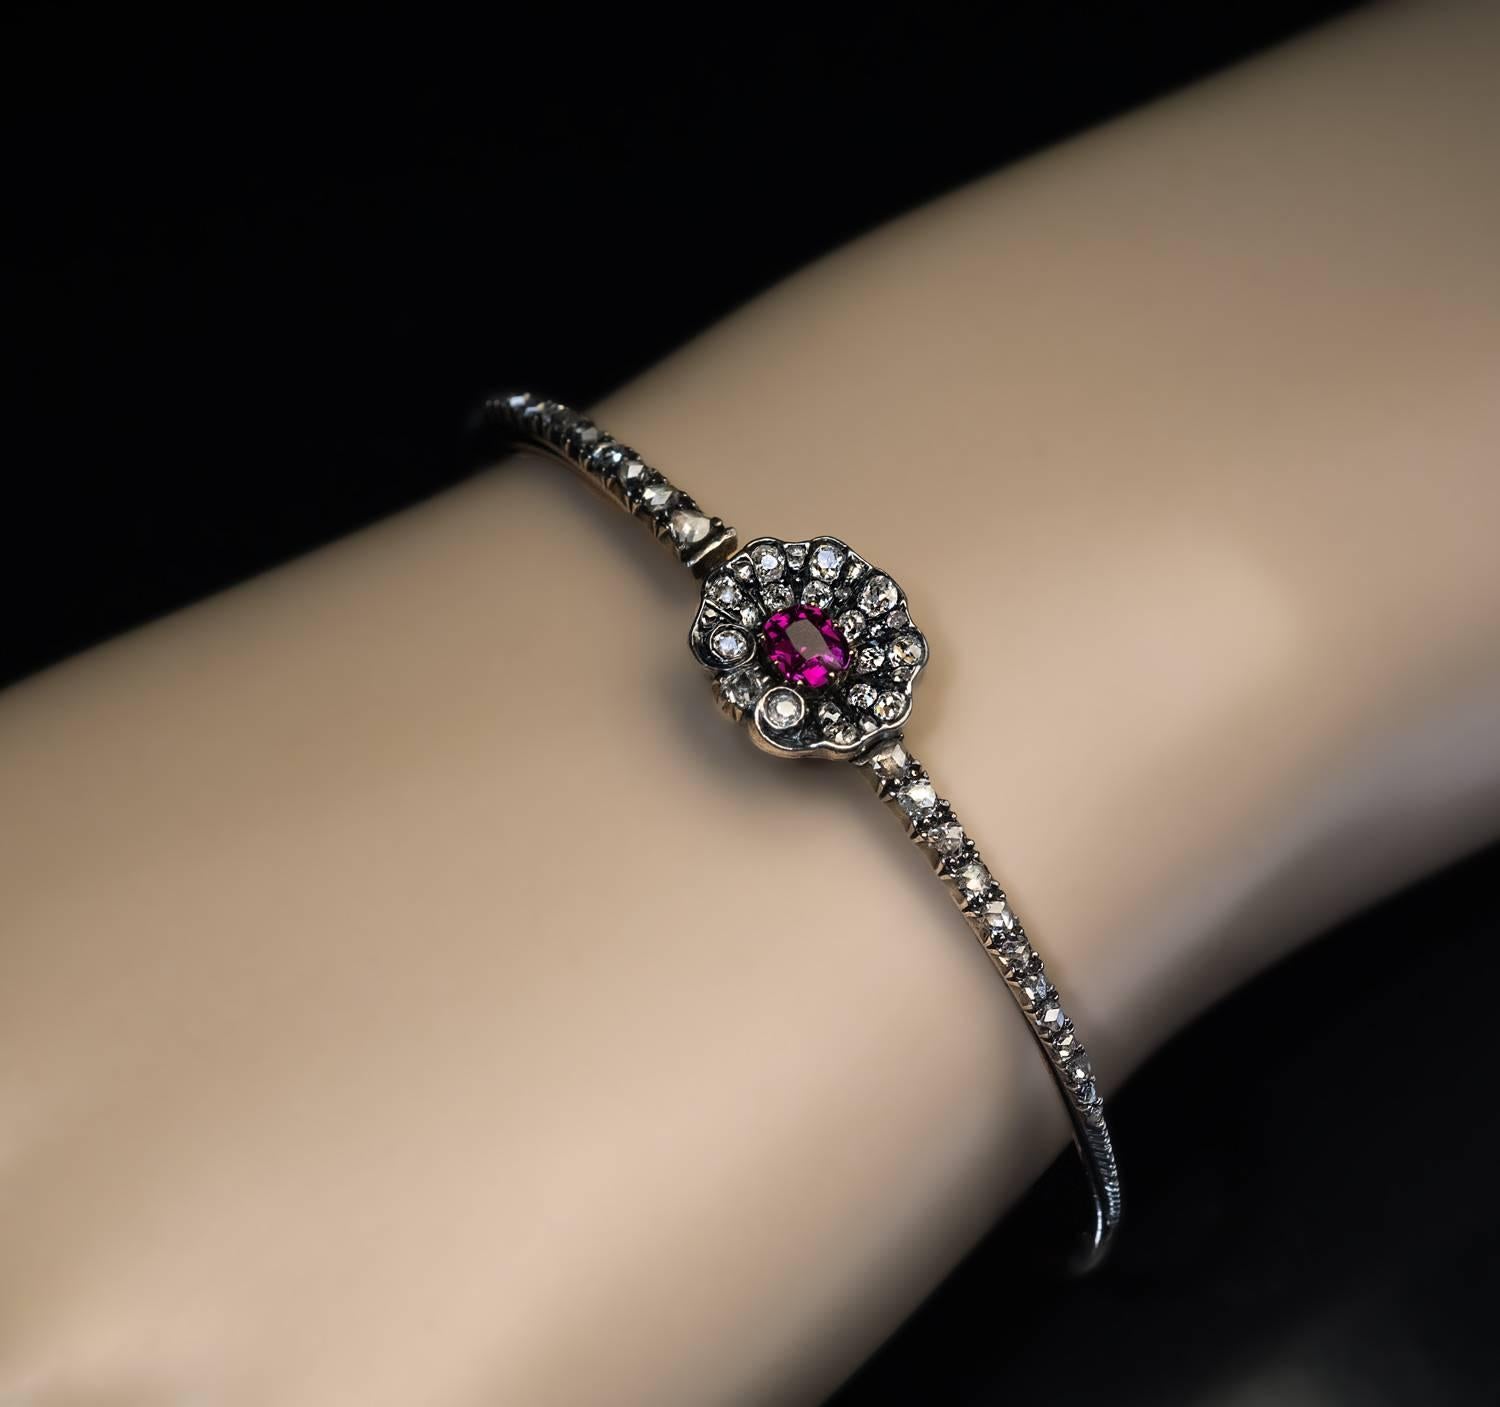 Circa 1850

An early Victorian era silver-topped 14K gold bangle bracelet is centered with a ruby and diamond stylized shell flanked by graduating rose cut diamonds.

The cushion cut ruby is of an excellent color and clarity and likely of Burma